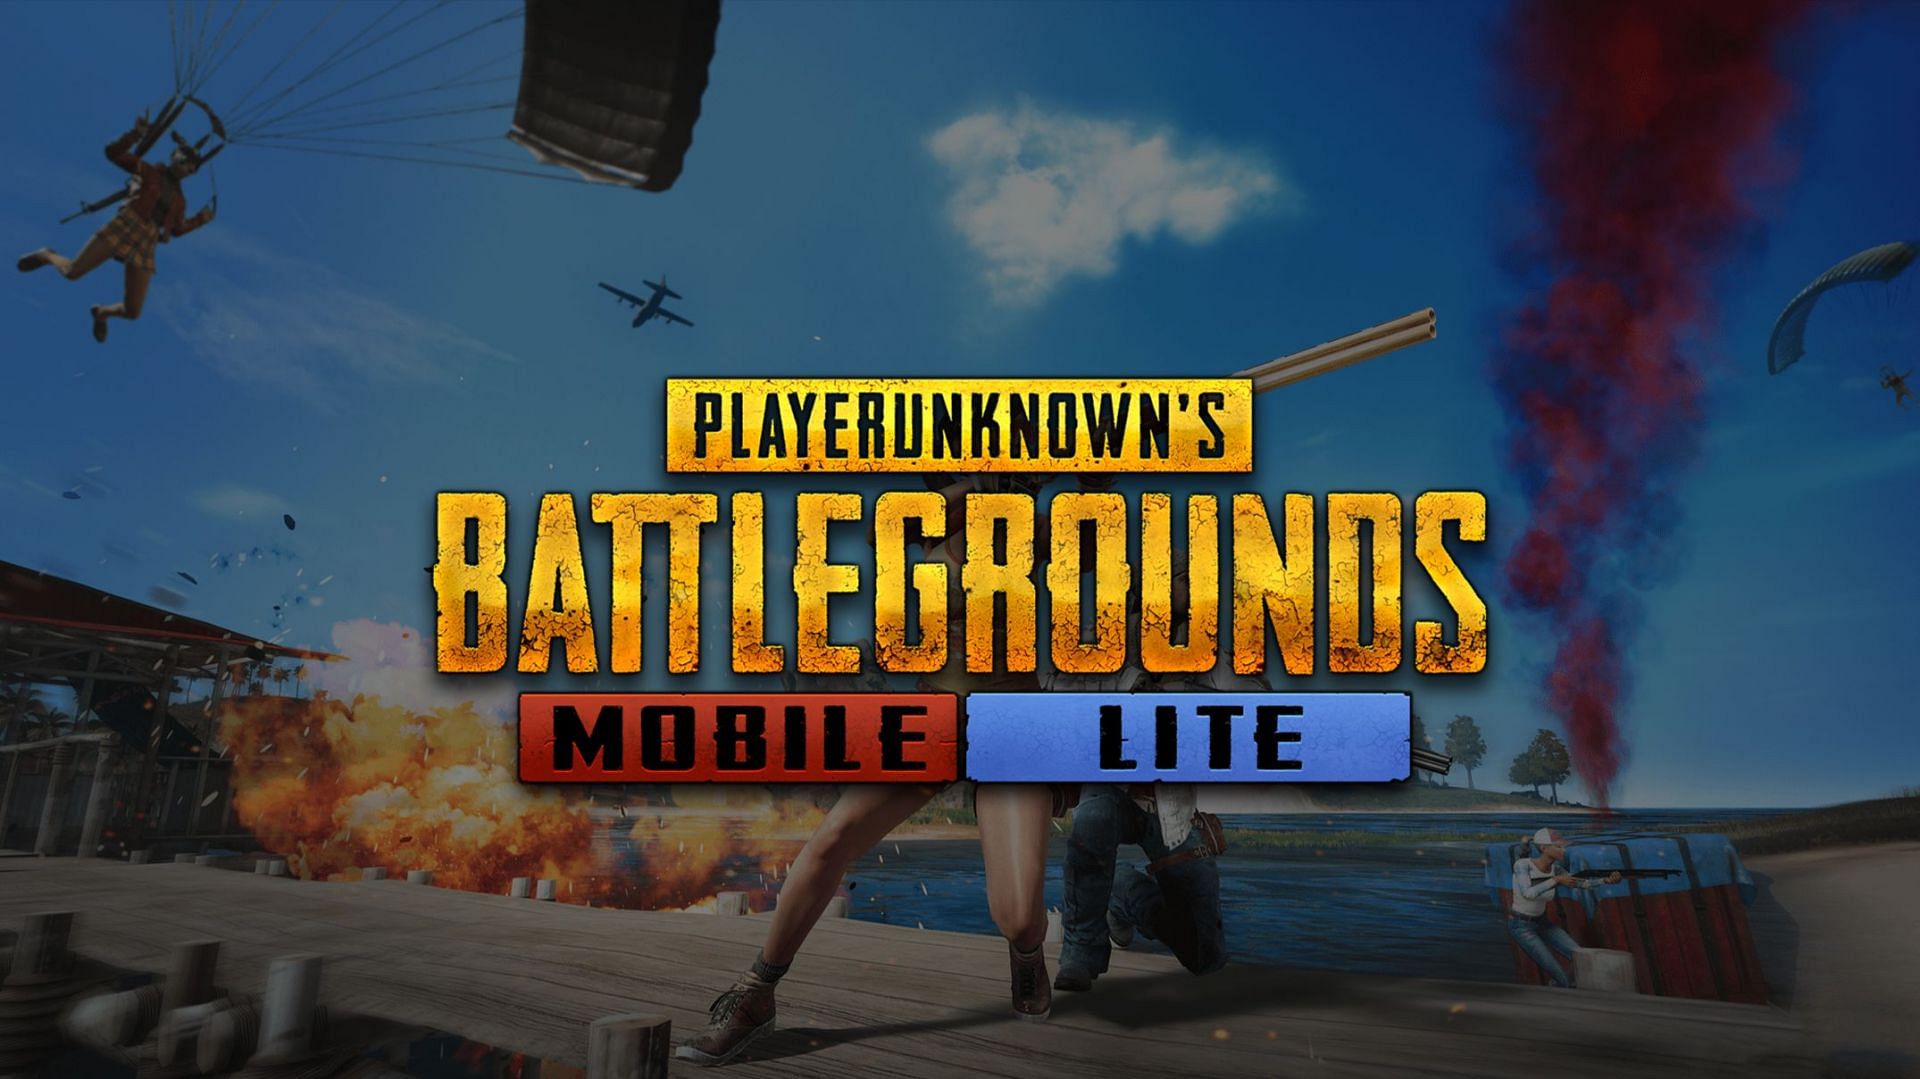 How to download PUBG Mobile Lite latest update APK in January 2022